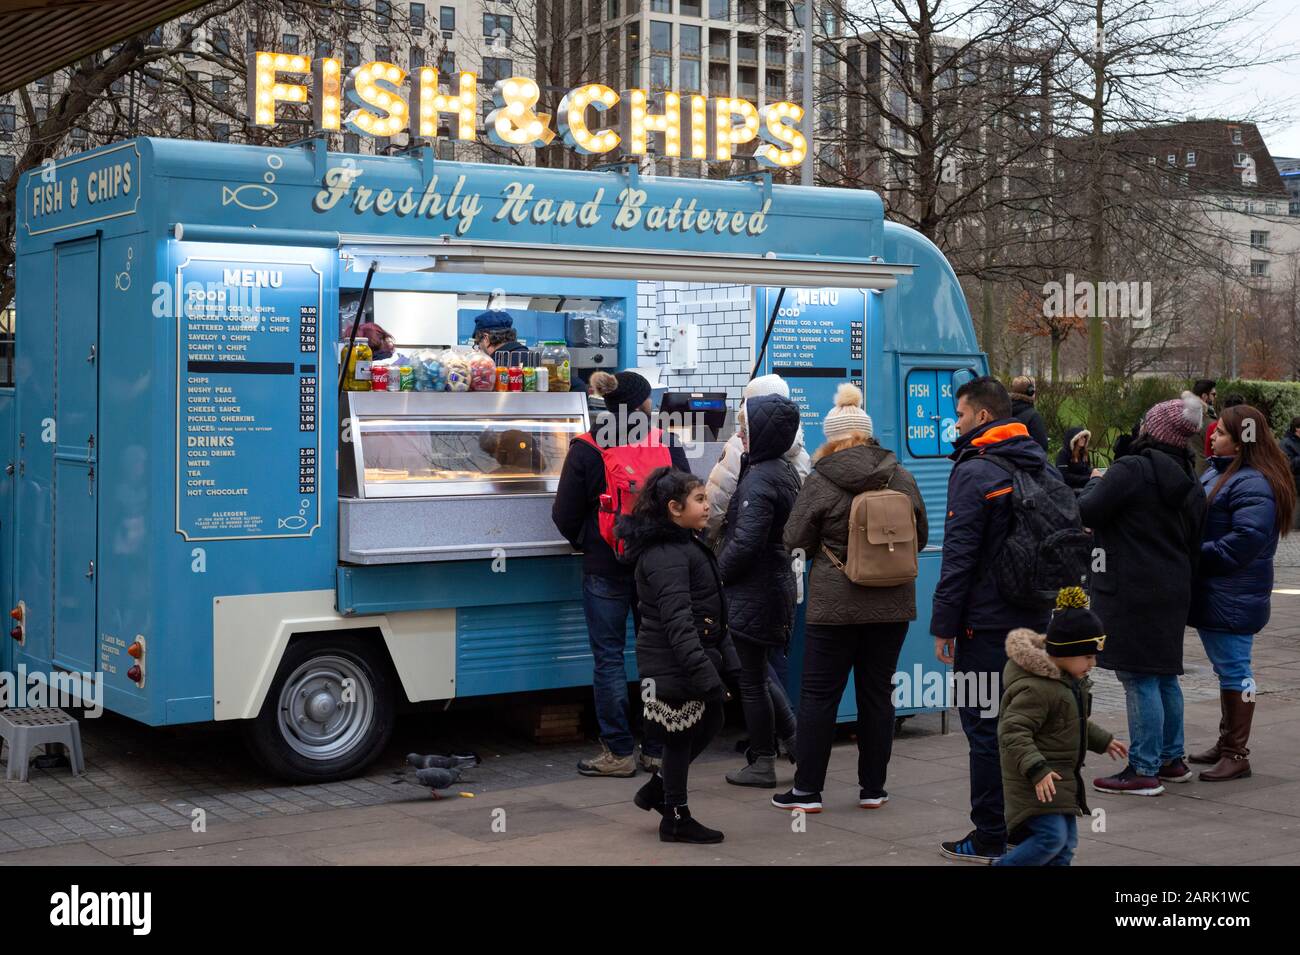 Street food London truck People and tourists queueing for fish and chips at a vintage style blue van as a mobile food stall on the South Bank in London, UK as of 2020 Stock Photo